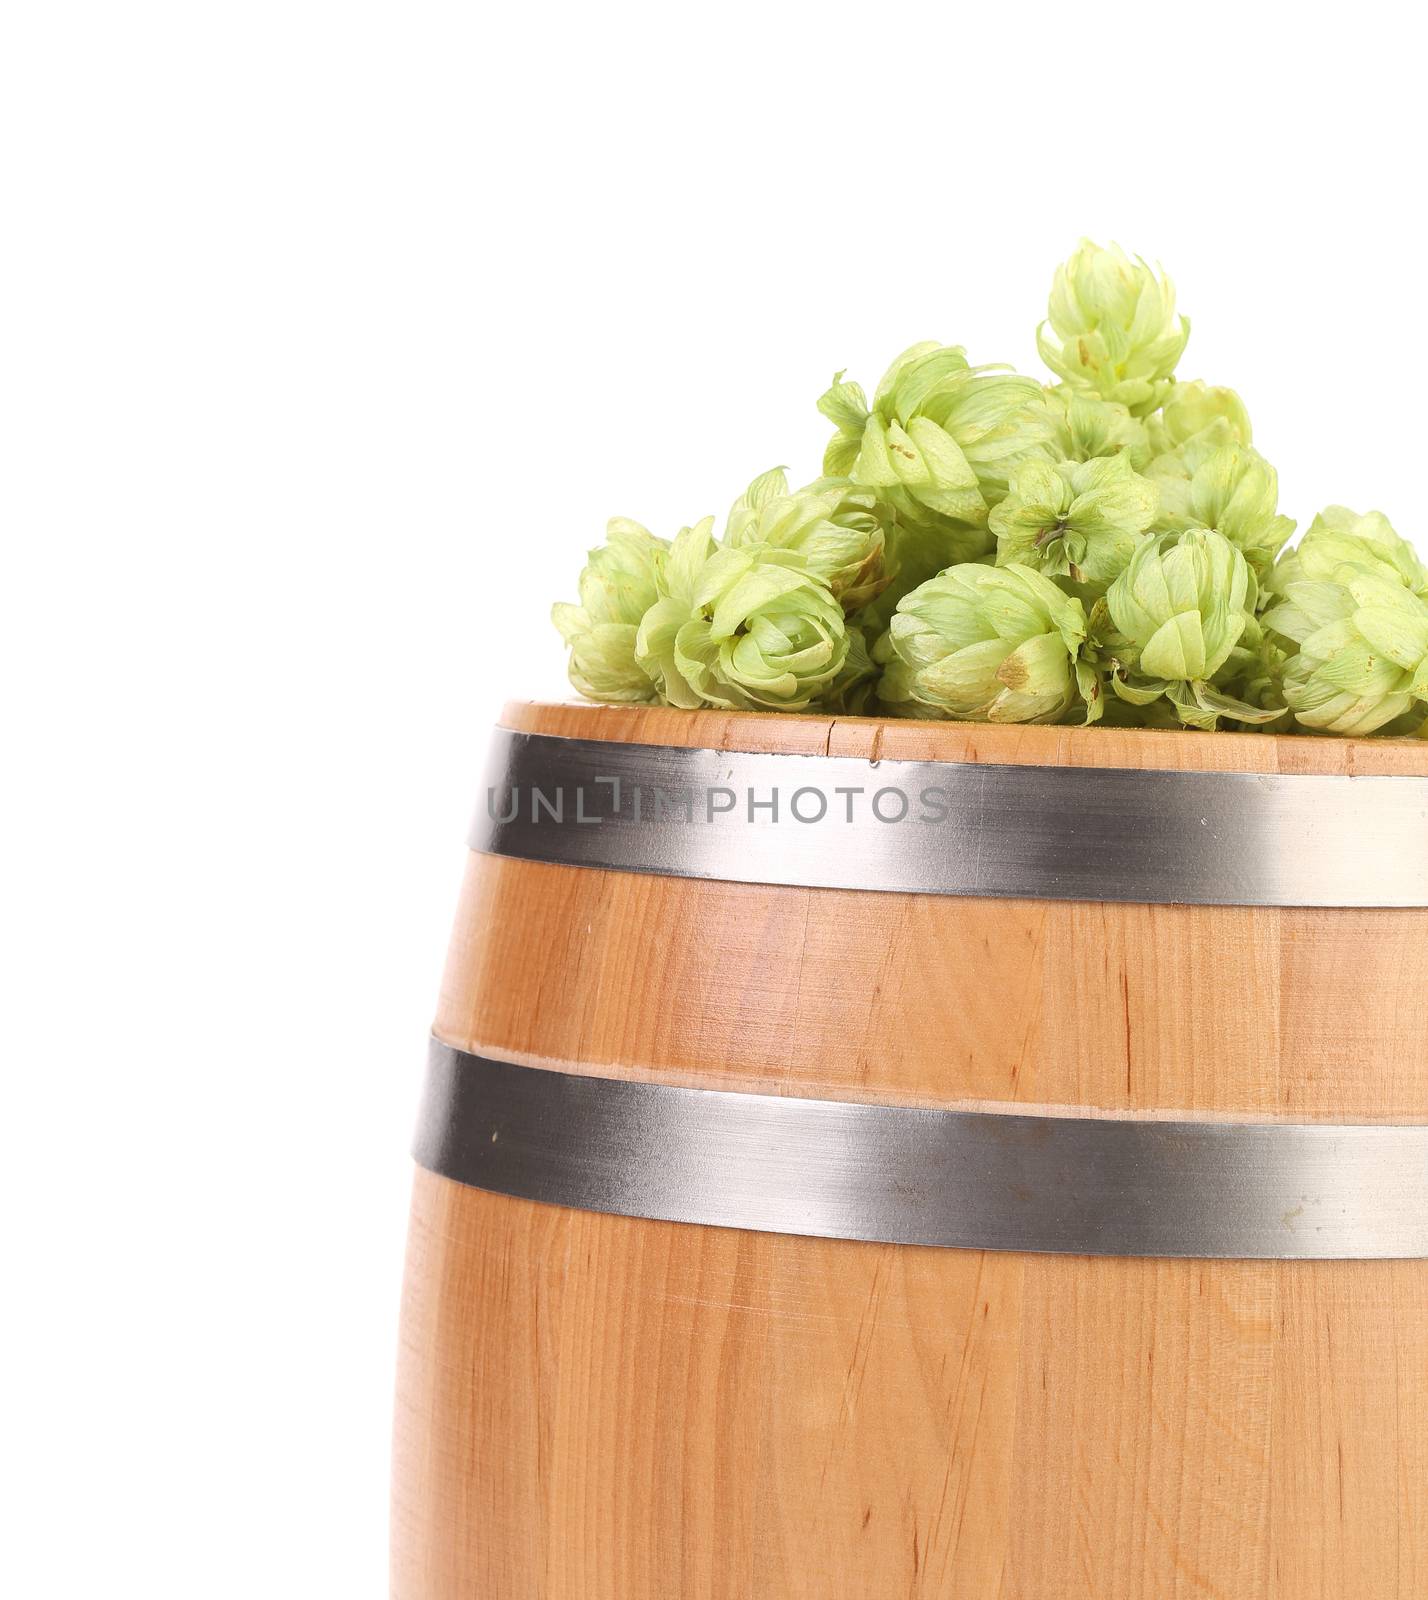 Hops and wooden barrel. Isolated on a white background.